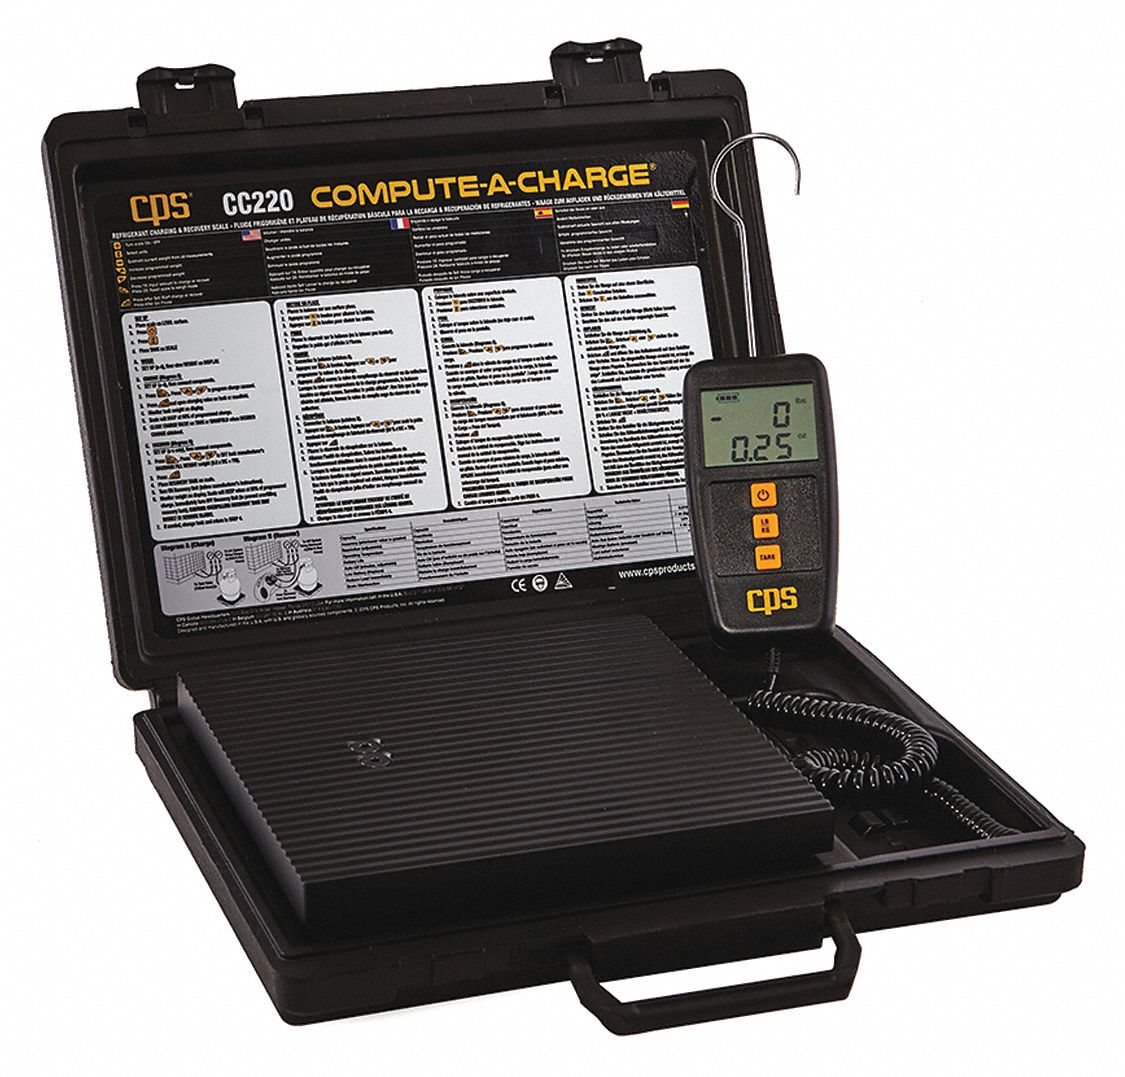 Refrigerant Charging or Recovery Scale: Electronic, 220 lb Max. Capacity (Lb.)